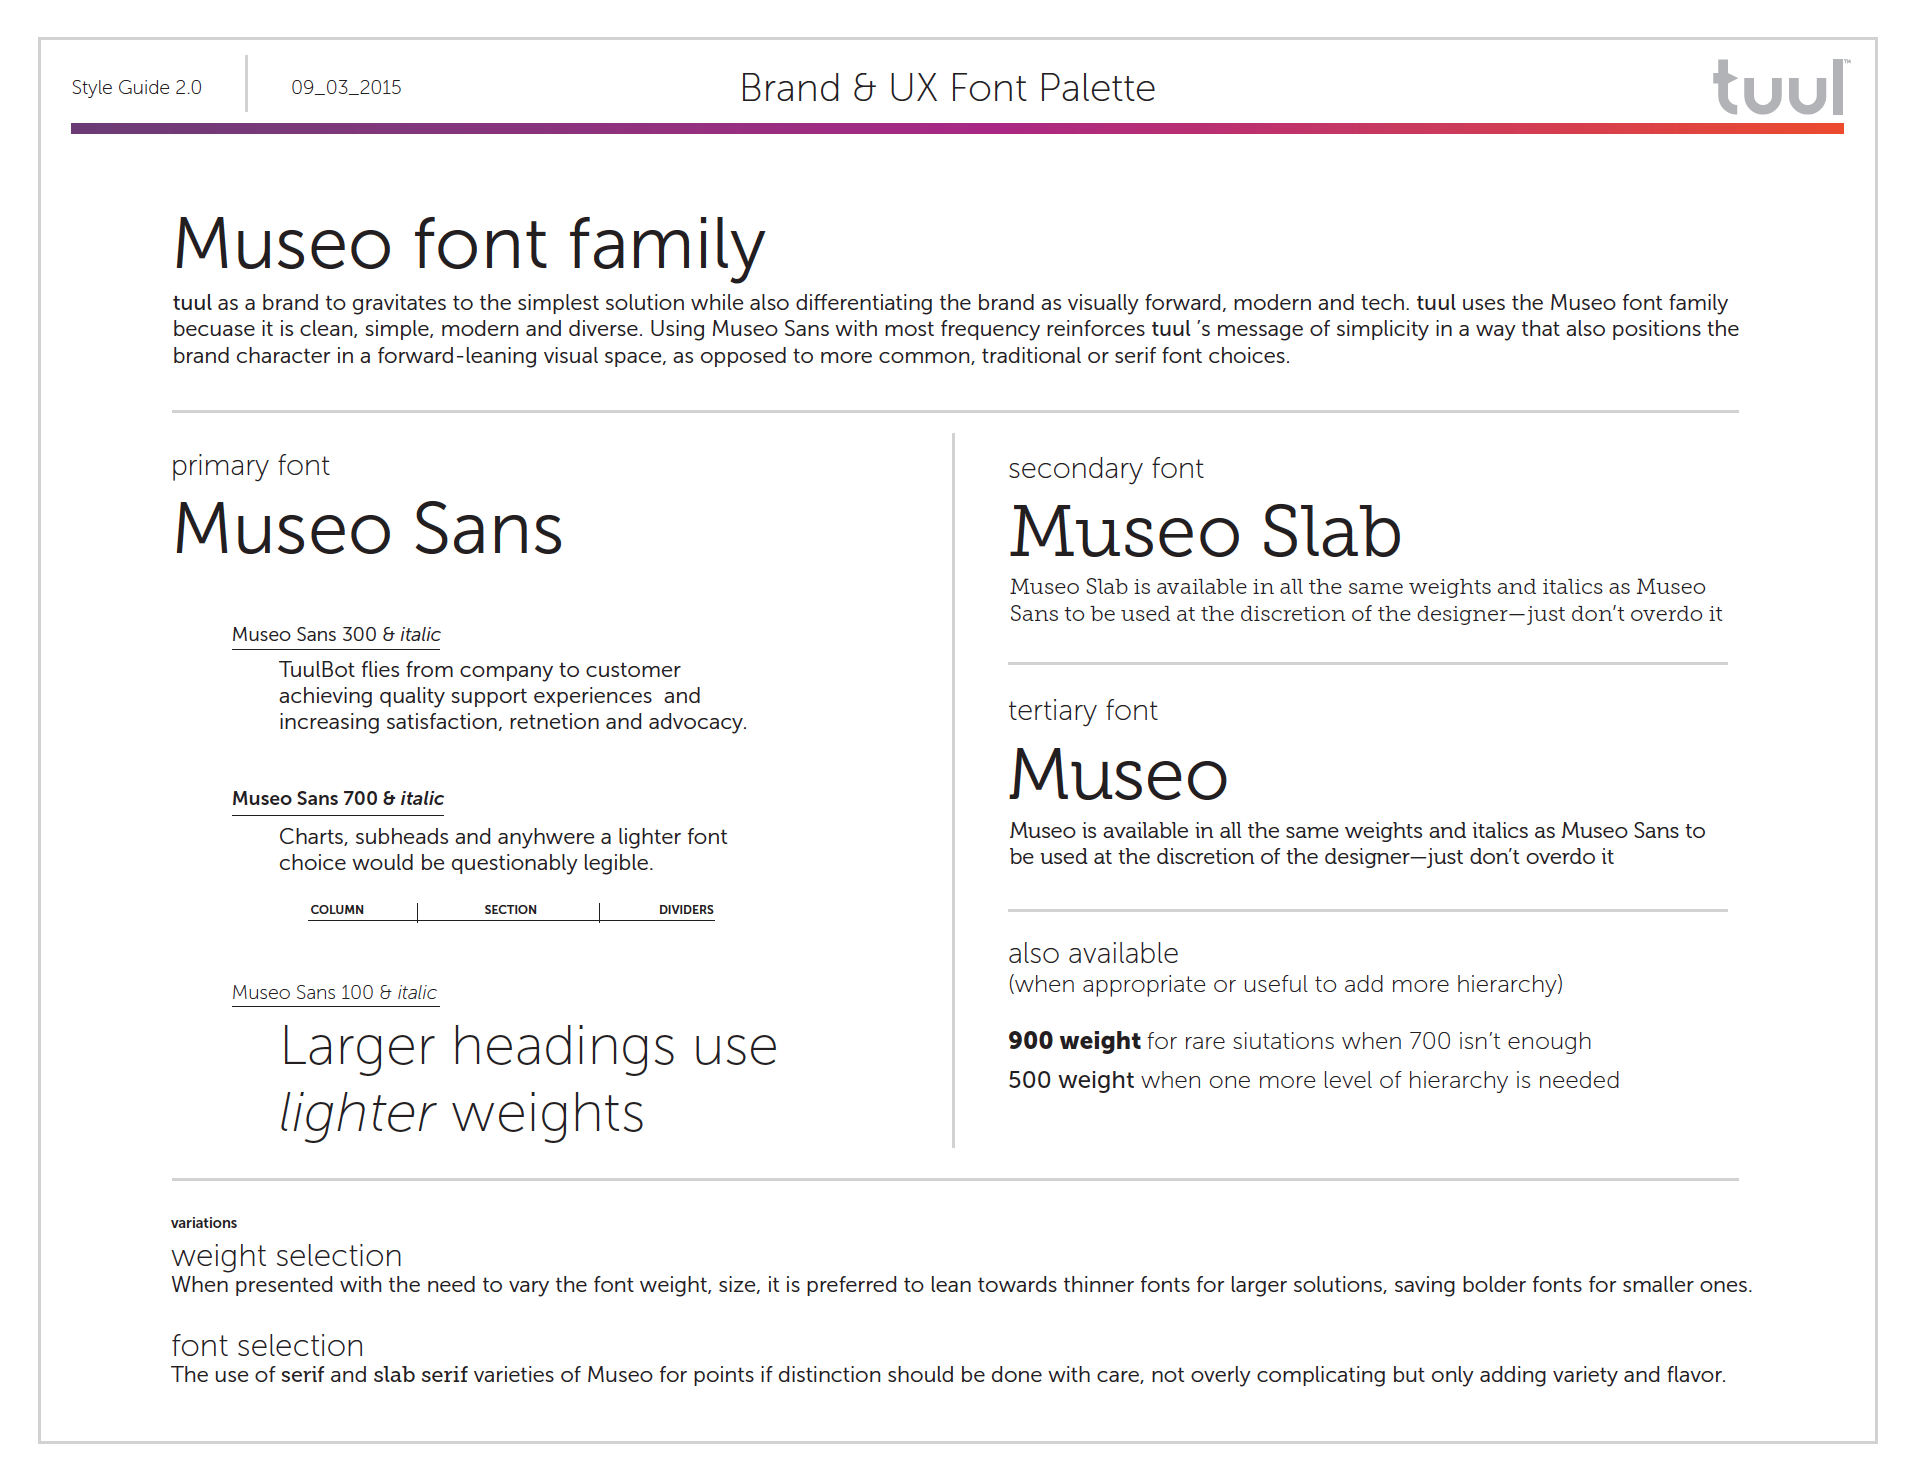 tuul-brand&us-font-palette.png